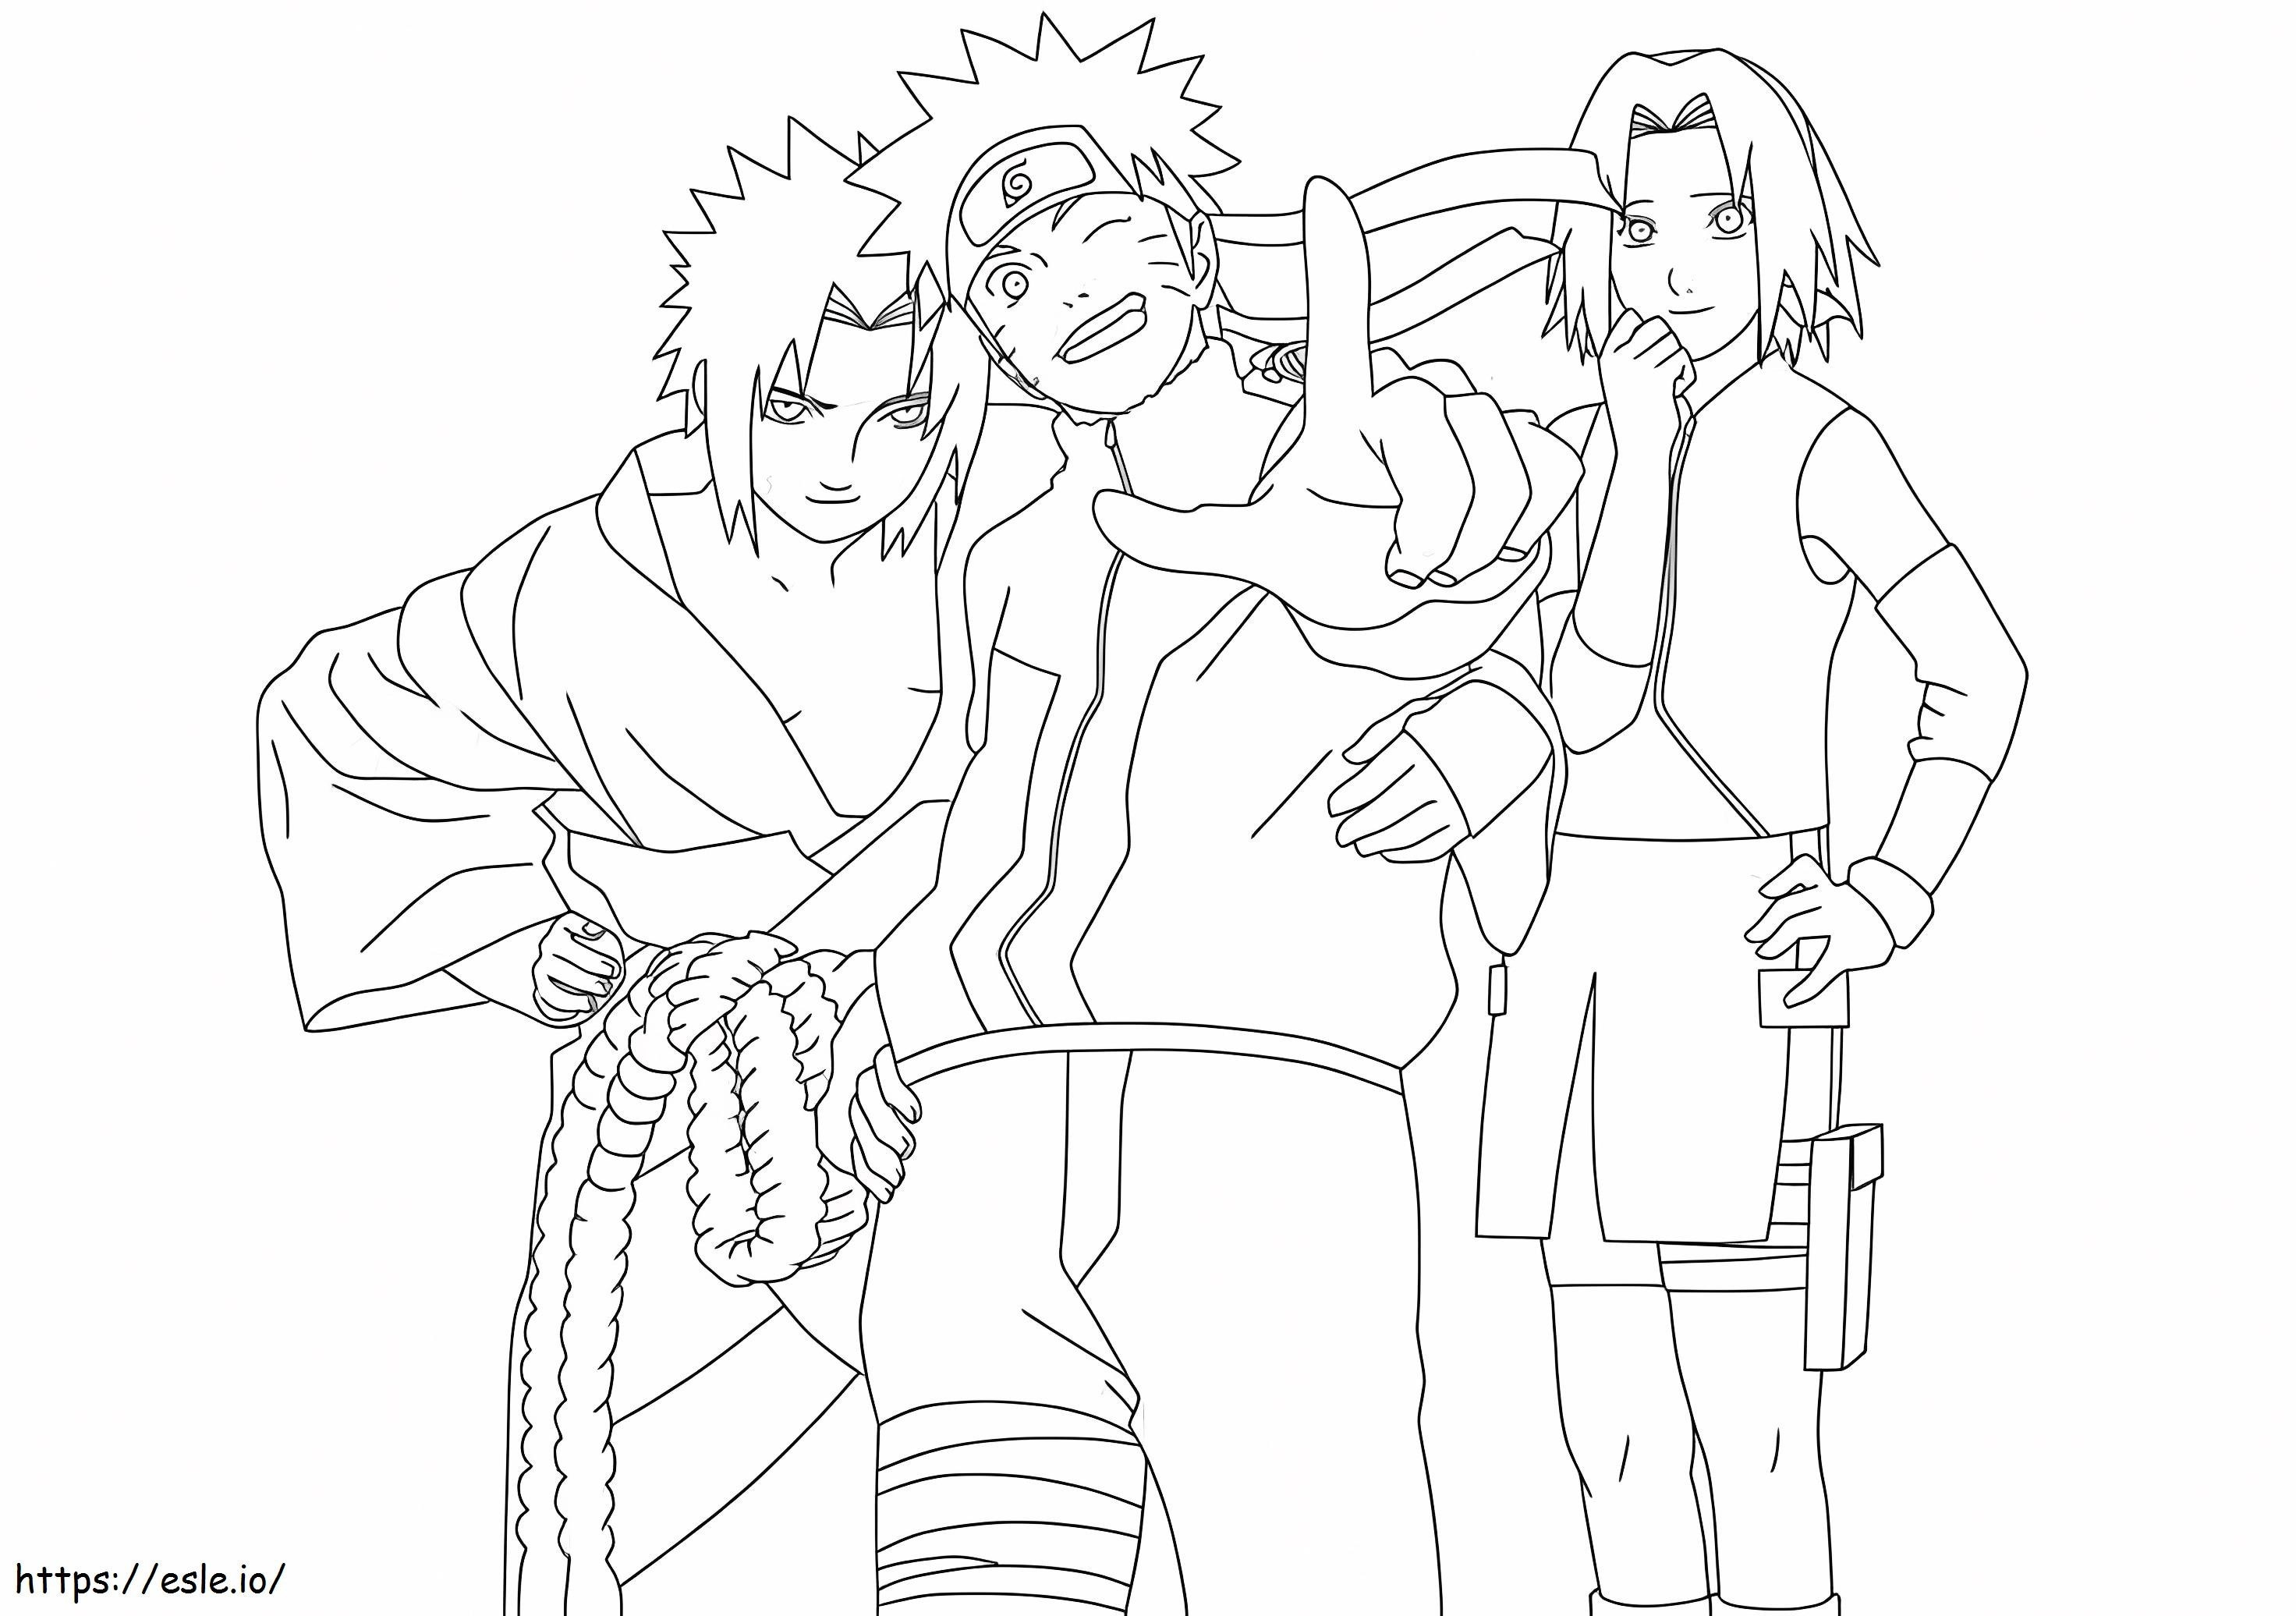 Fun With Sasuke And His Friends coloring page